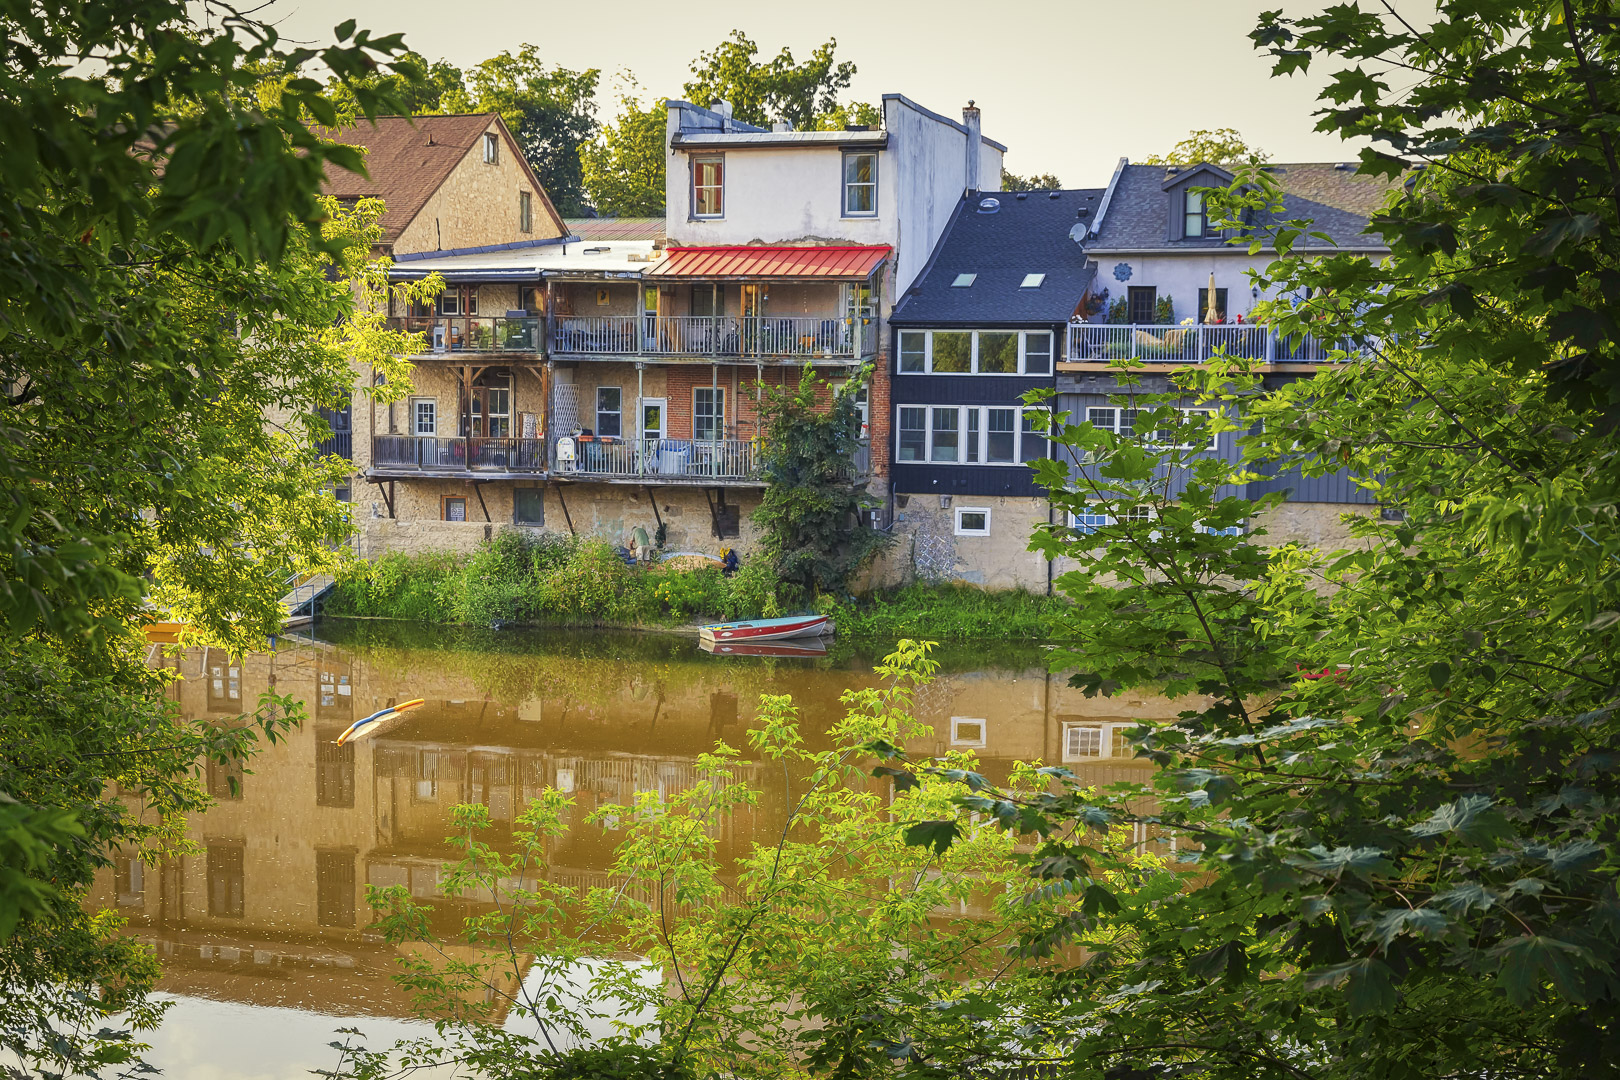 Homes along the Grand River